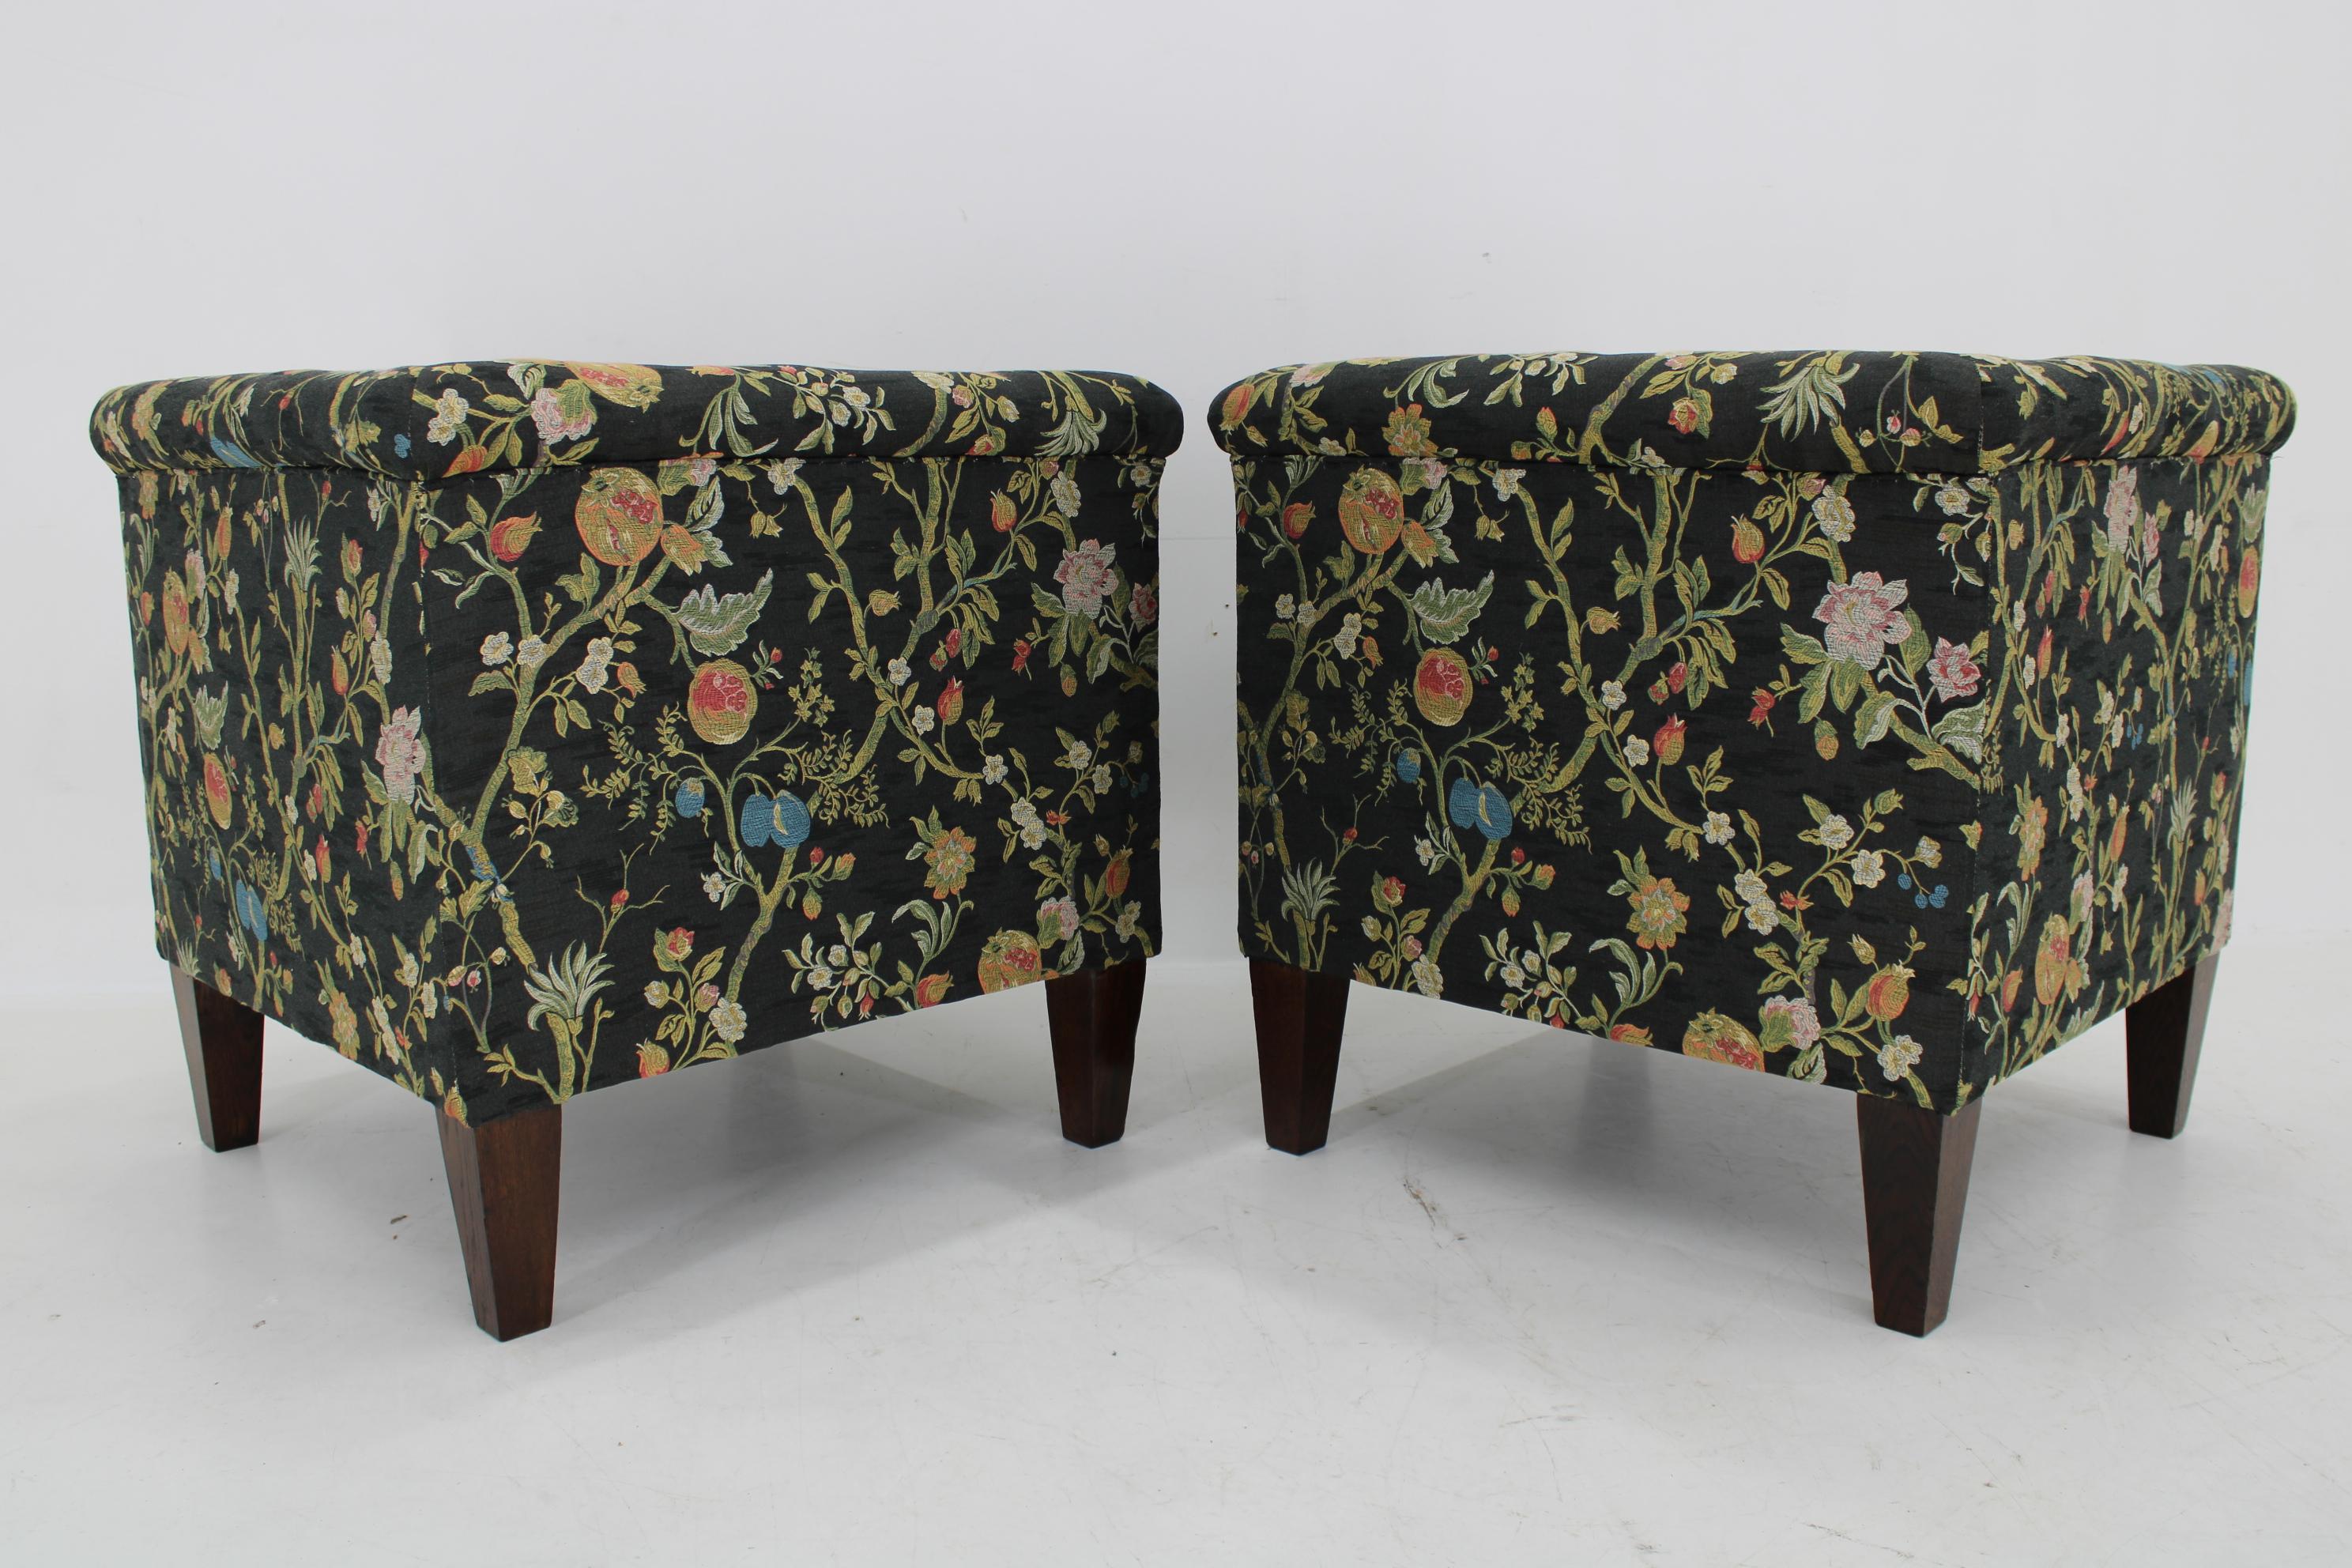 1930s Restored Pair of Art Deco Armchairs , Czechoslovakia For Sale 2